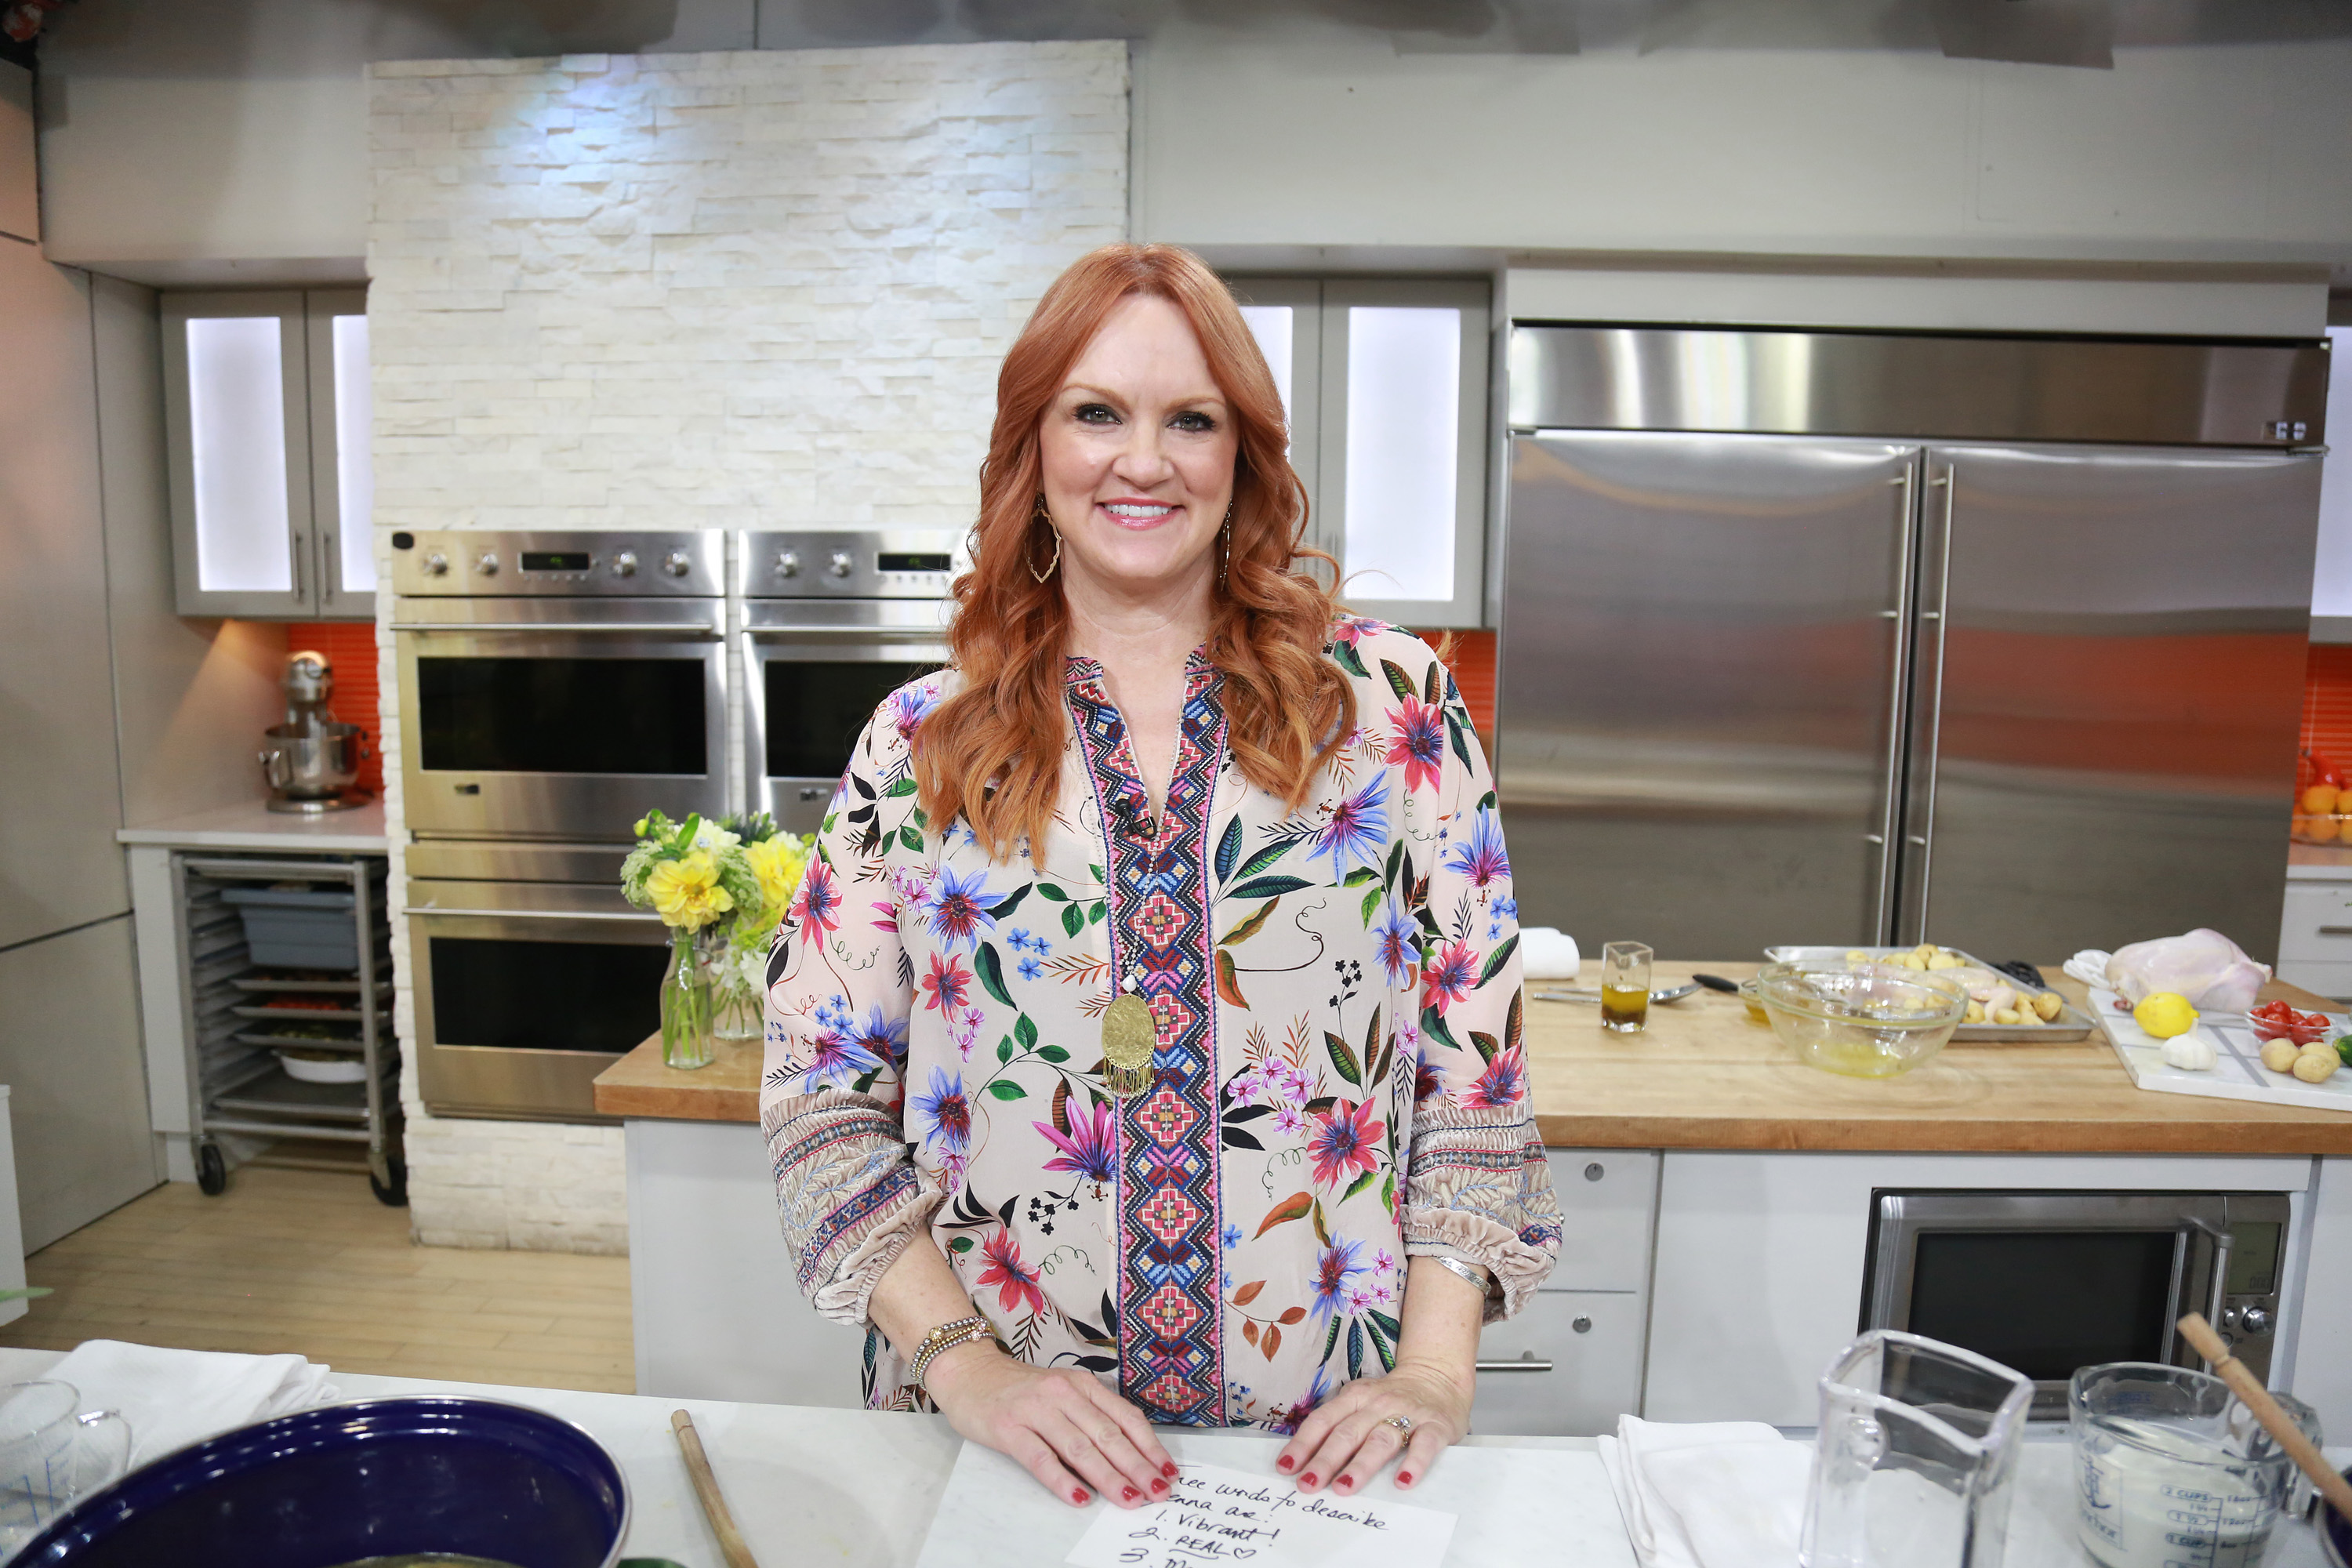 Food Network star Ree Drummond wears a print blouse in this photograph.